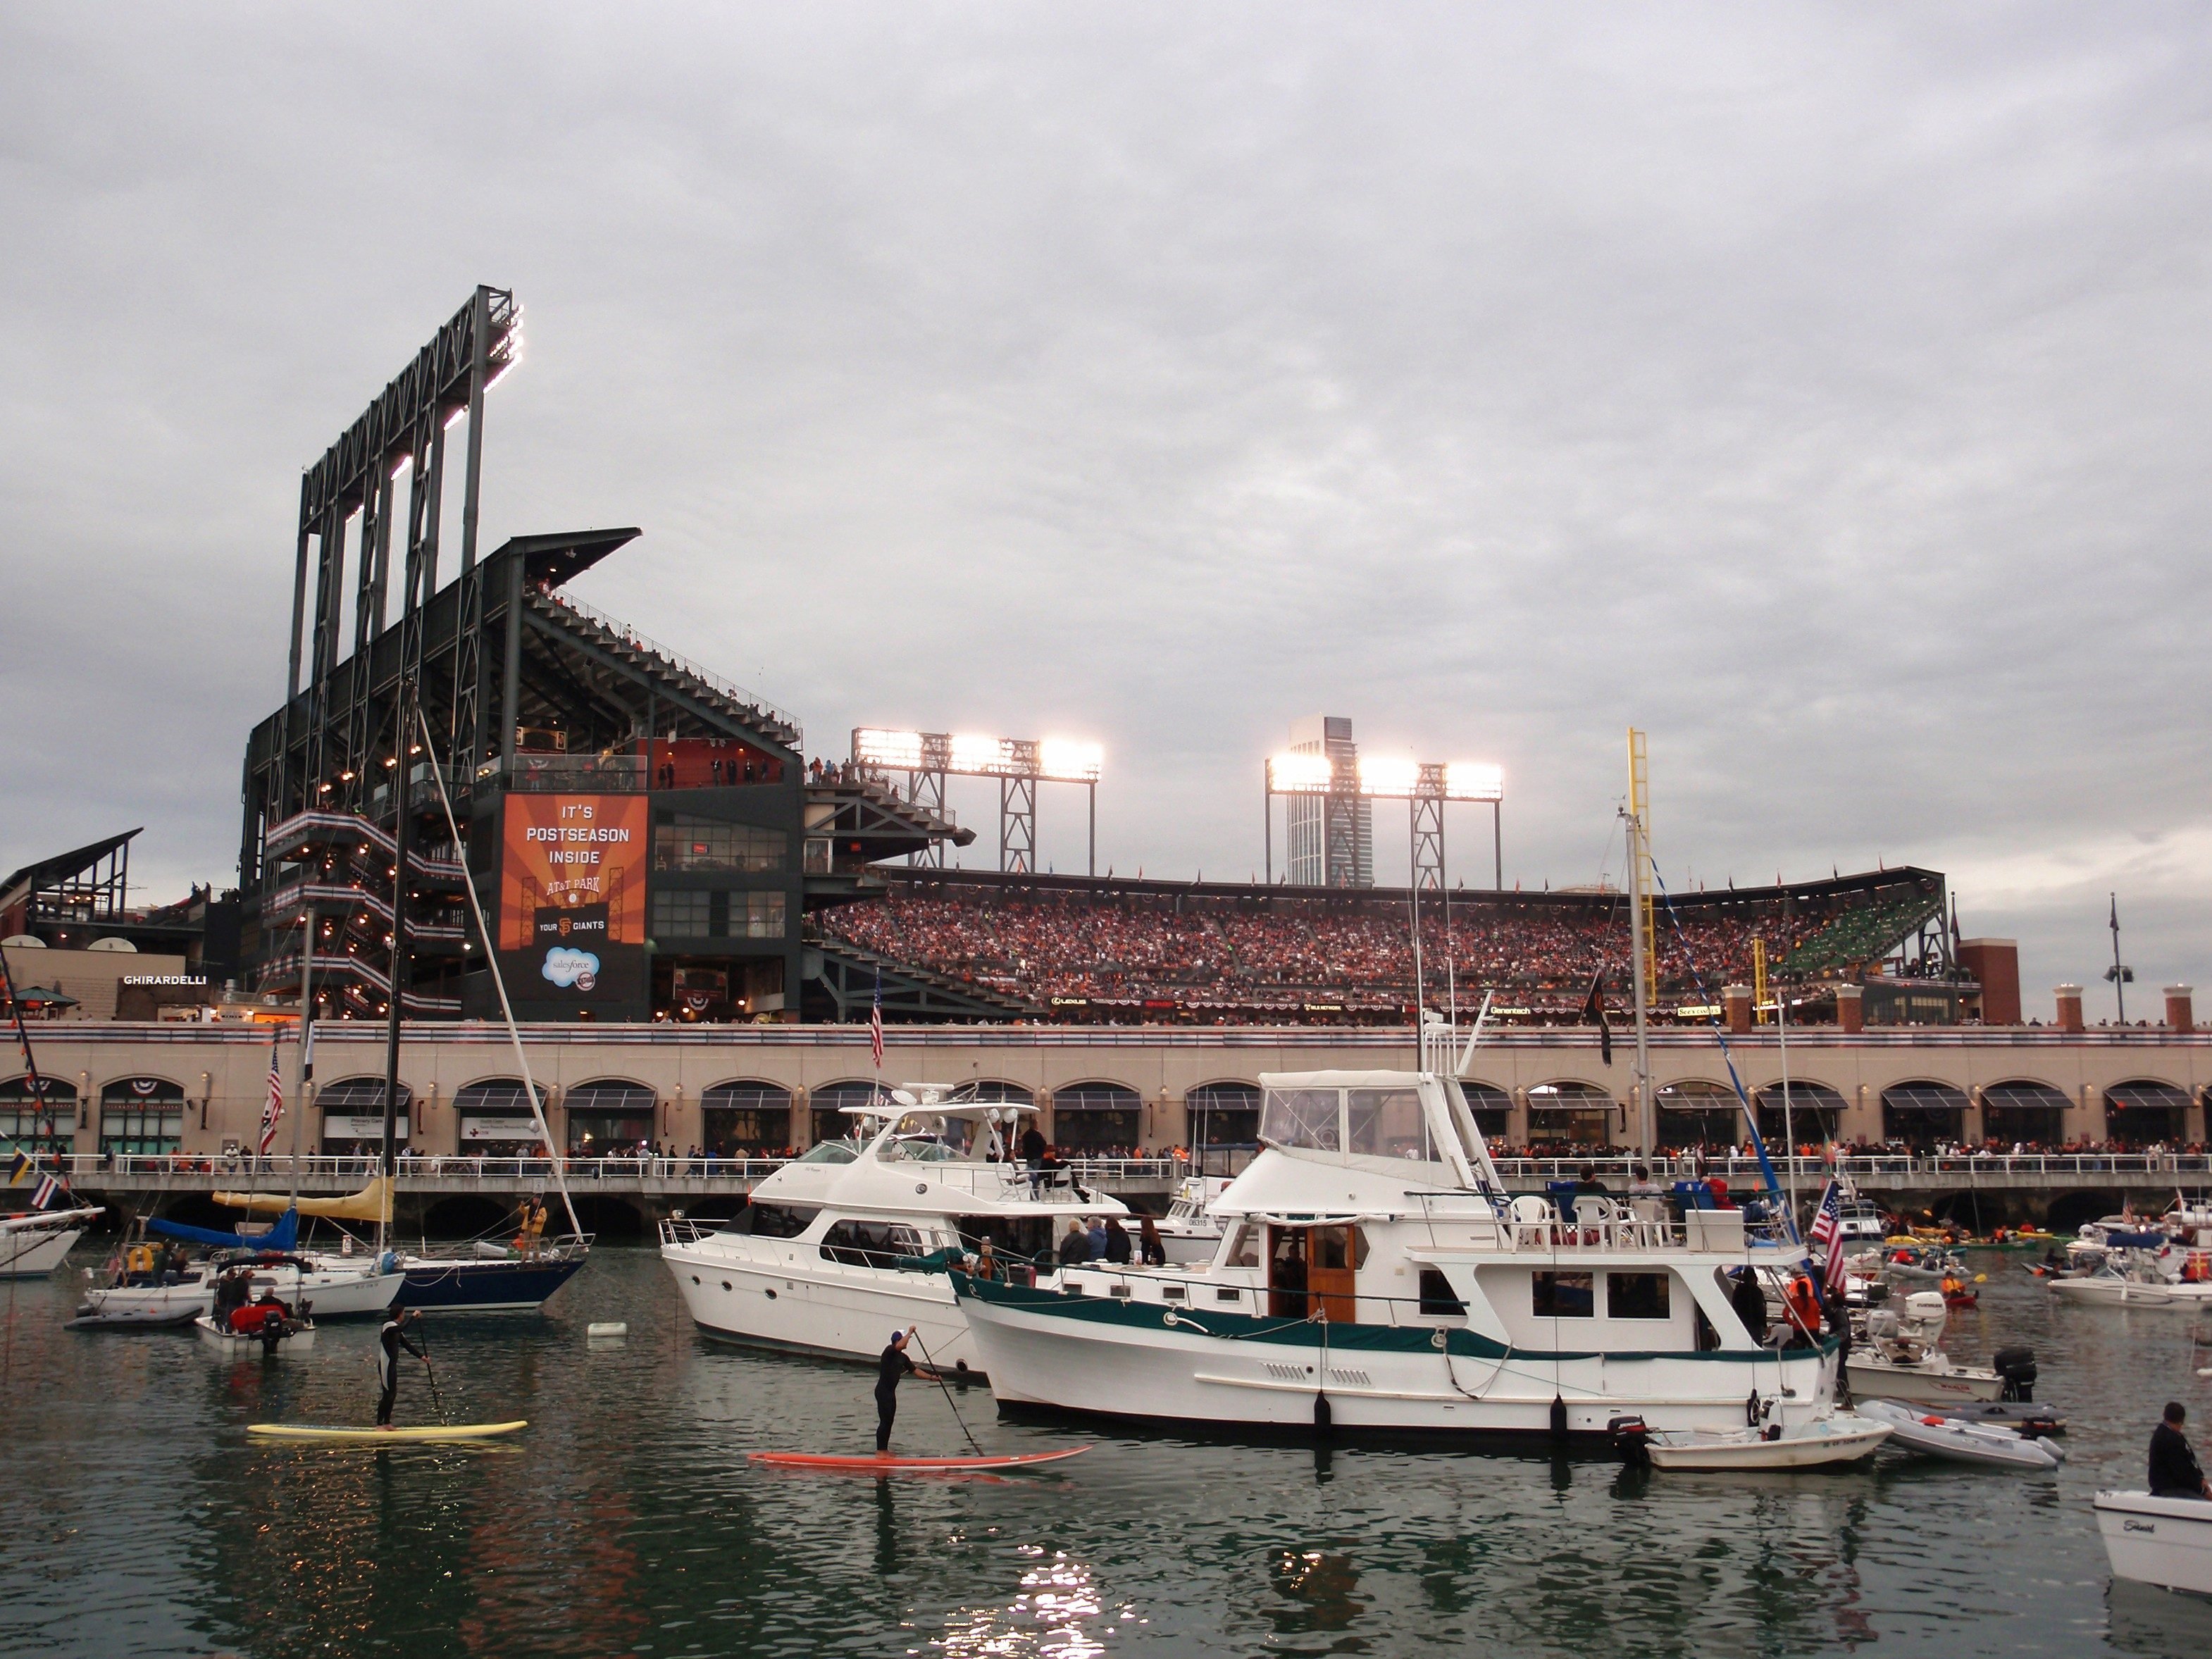 2. AT&T Park - San Francisco, California; home of the Giants.